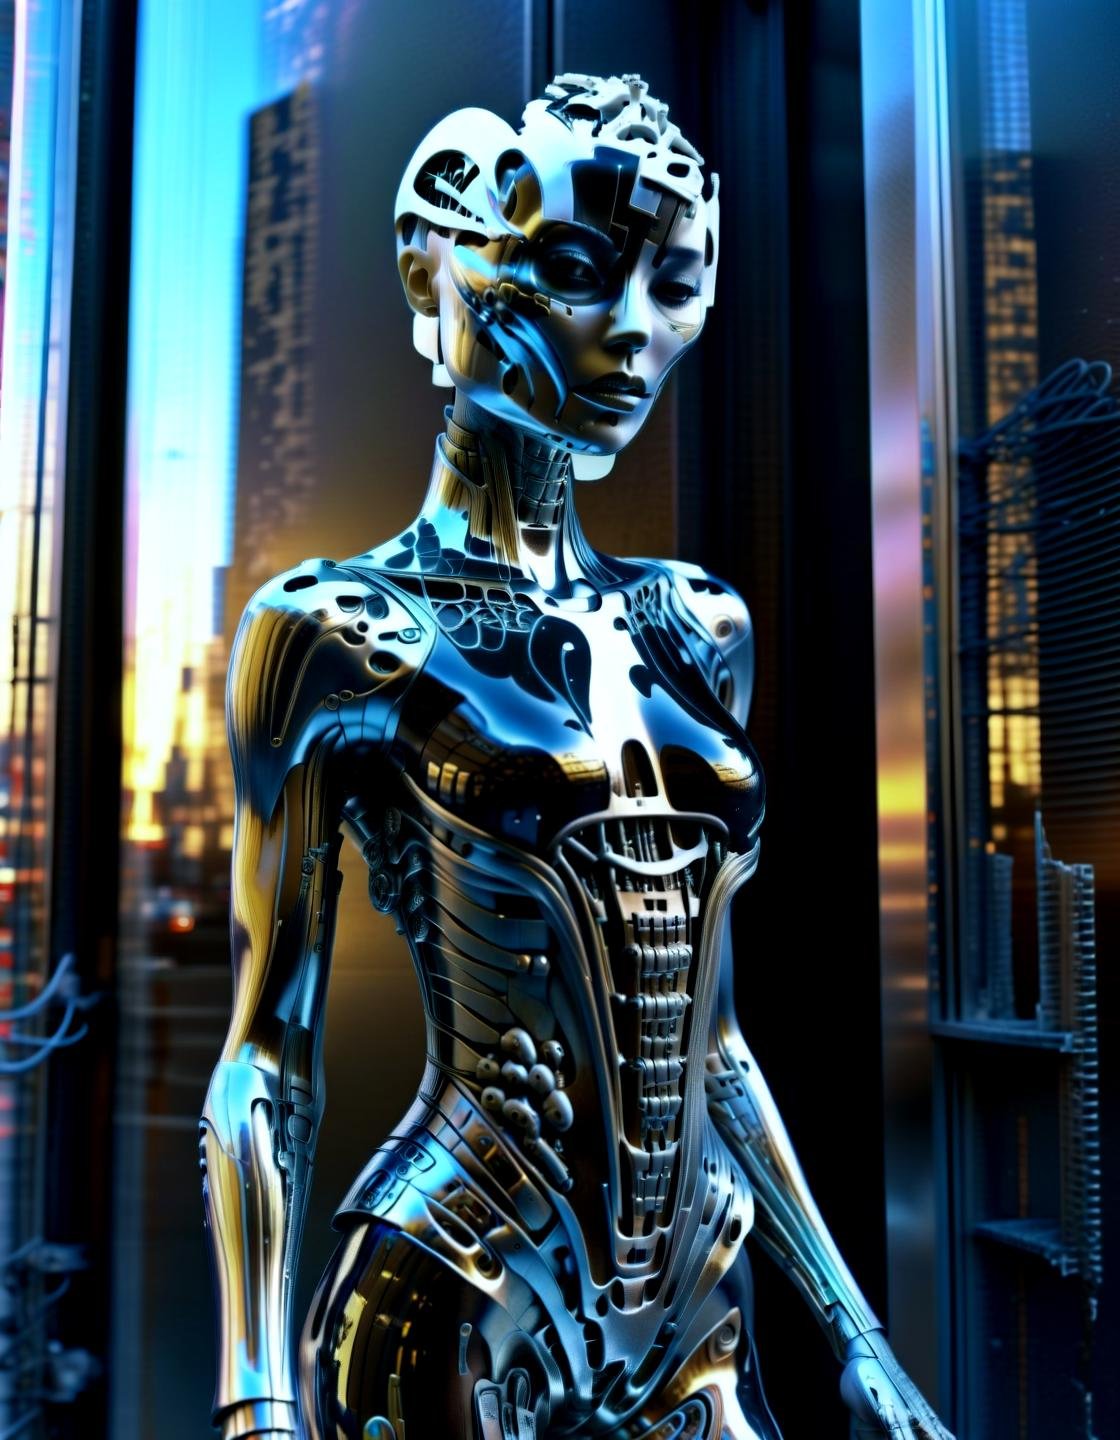 Haute Couture Fashion cyberpunk style, , solo, female with chorme skin, (full body:1.331), hightech_robotics Pinhead (Hellraiser) with light in his eyes and dark smoke around his body, (white head:1.3), (neon crisscrossing fine lines on face:1.2), (many neon pins pricked the entire head), BREAK stands still in a back alley, looking out to the crowded main street with neon sign, he is hoping to find the next victim, outdoors, high-tech cyberpunk nightcity background, (unreal engine), ray tracing, dynamic light, godrays, reflections, fisheye view, from below angle, long distance shot, hyper detailed, high quality, neon, dystopian, futuristic, digital, vibrant, detailed, high contrast, reminiscent of cyberpunk genre, (by h.r. giger:1.05),,, Haute Couture Fashion, often for custom-fitted clothing, luxurious materials, or high-end design.